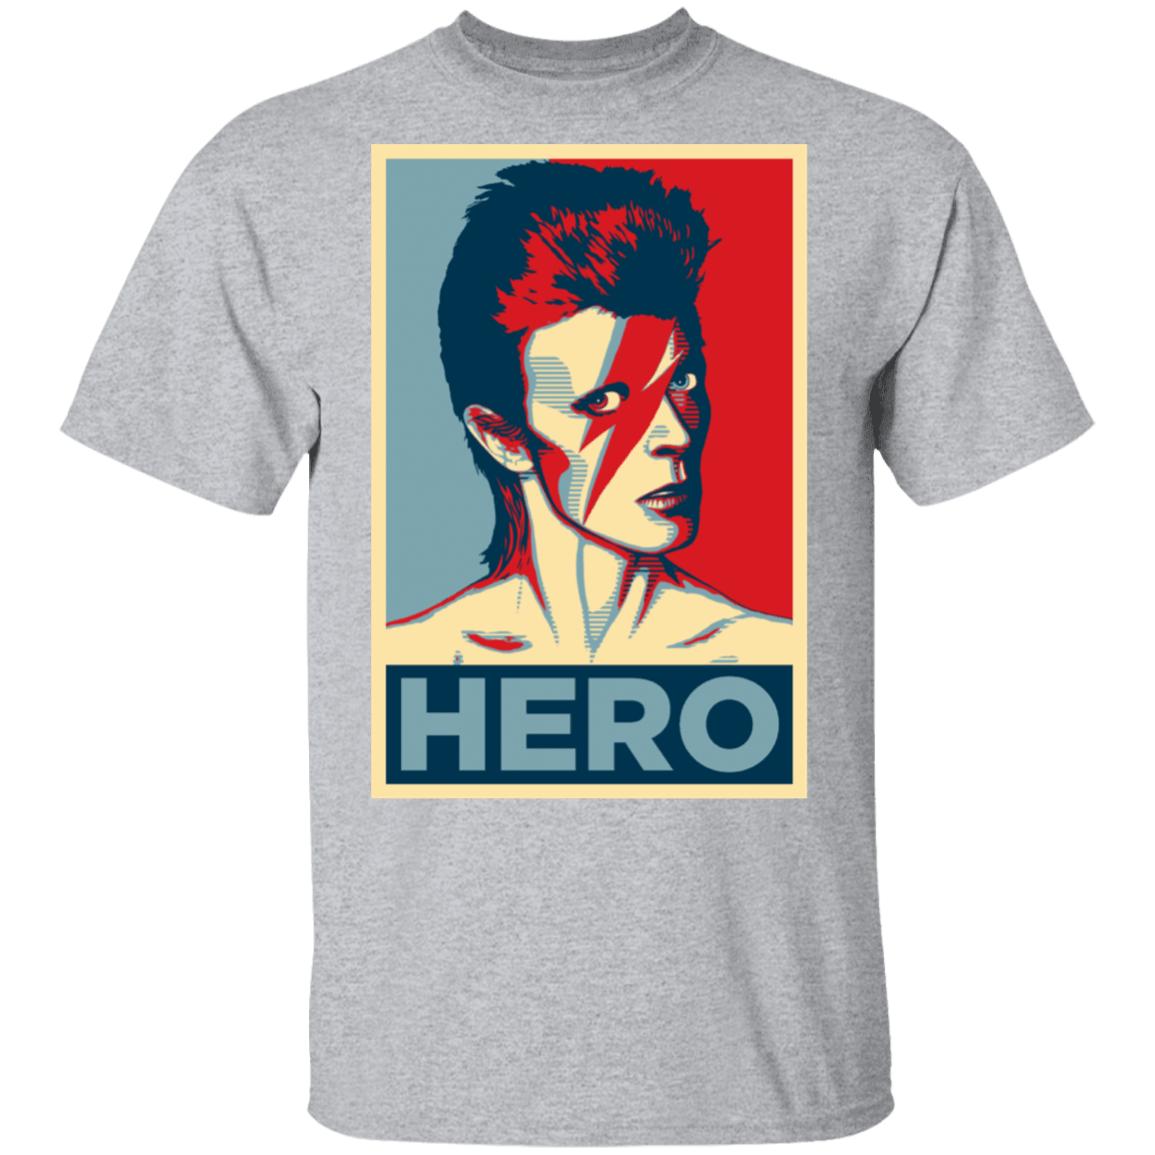 T-Shirts Sport Grey / S Obey the HERO T-Shirt